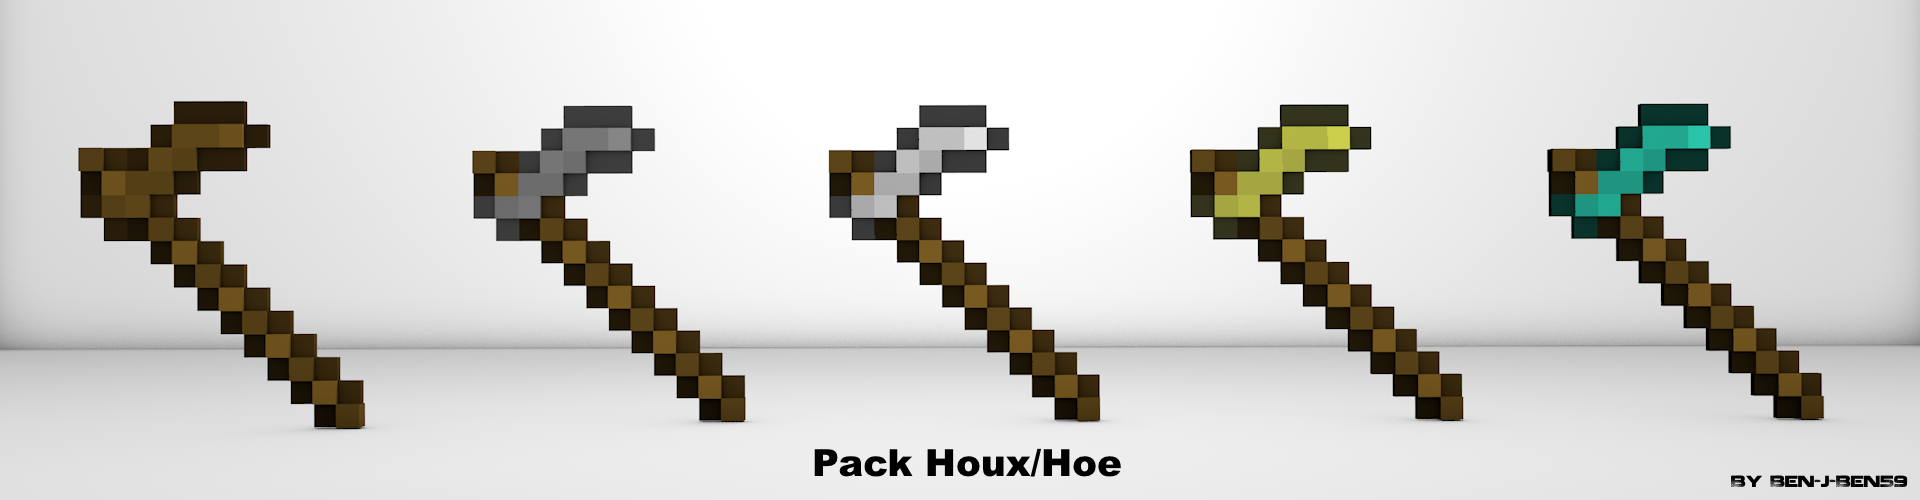 pack_houx-png.65189